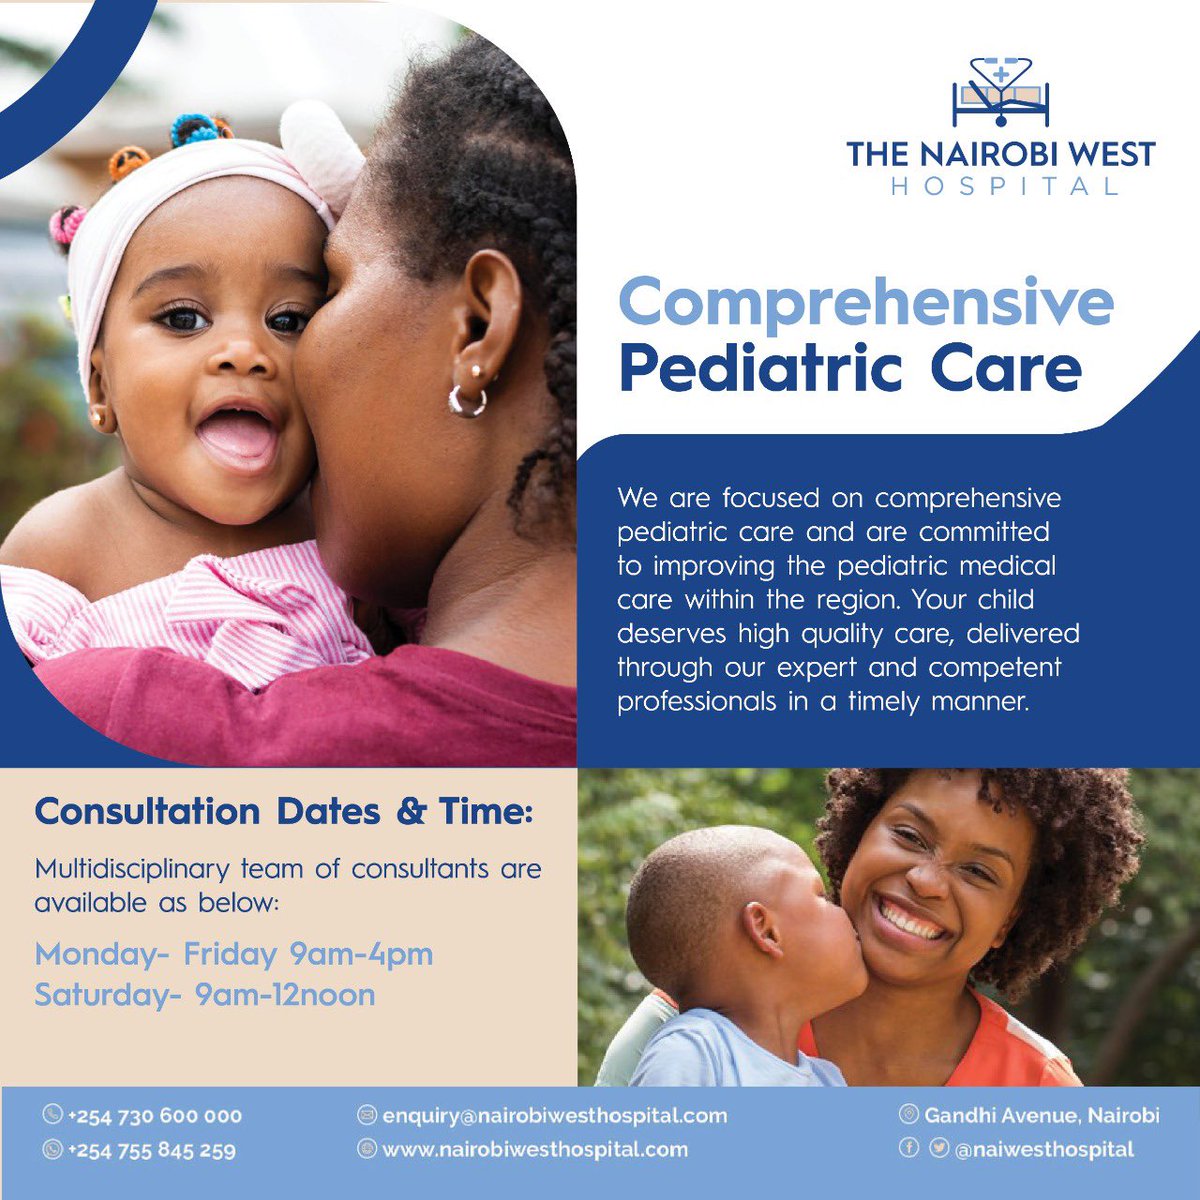 Our Comprehensive Pediatric Care.
Book a consultation session today!
 
Contact us on; 0730600000.
#Tnwhcares
#Multispecialtycare
#Pediatric #Pediatricservices